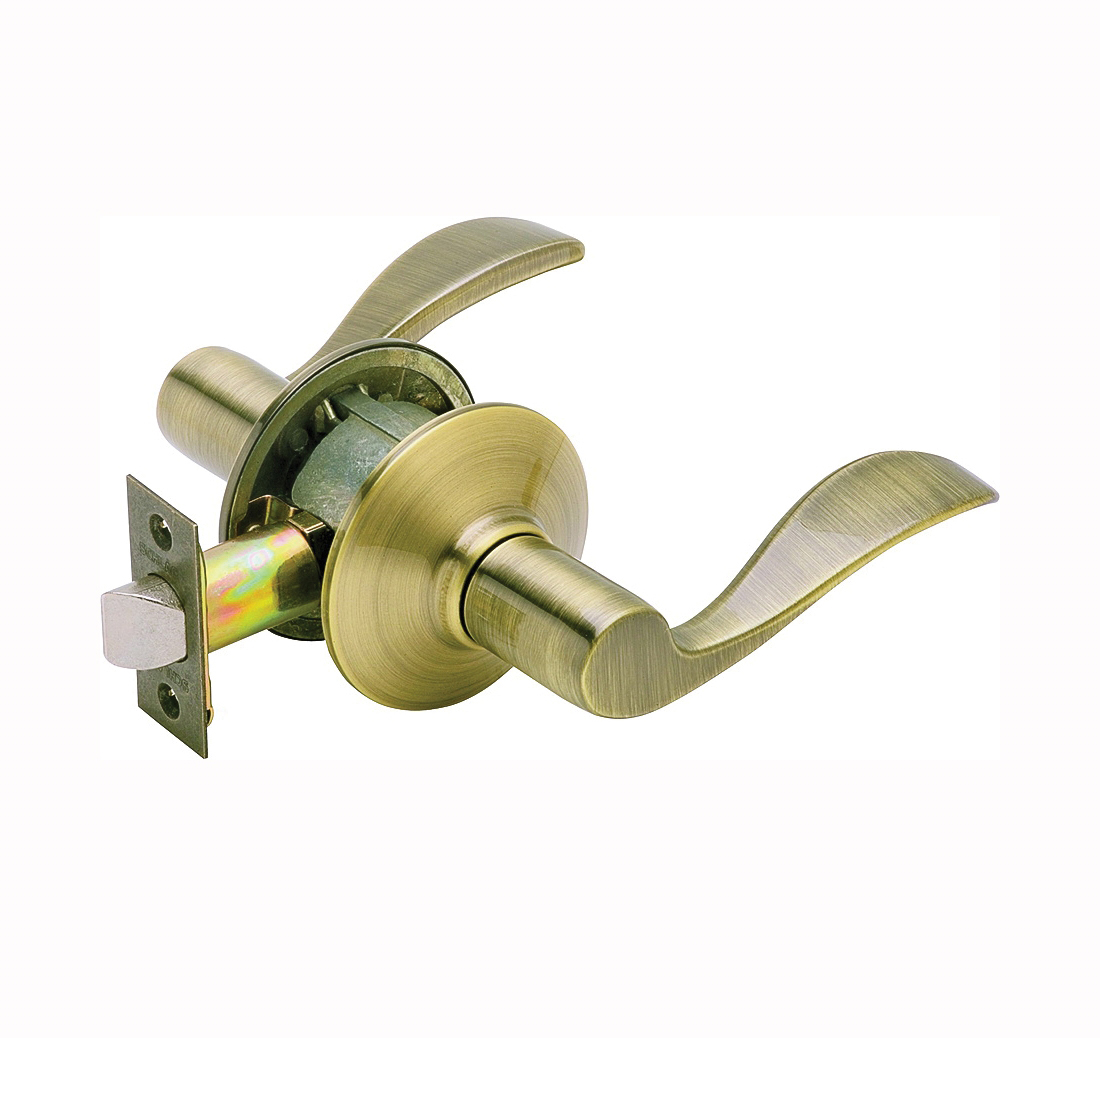 Schlage Accent Series F10 ACC 609 Passage Lever, Mechanical Lock, Antique Brass, Metal, Residential, 2 Grade